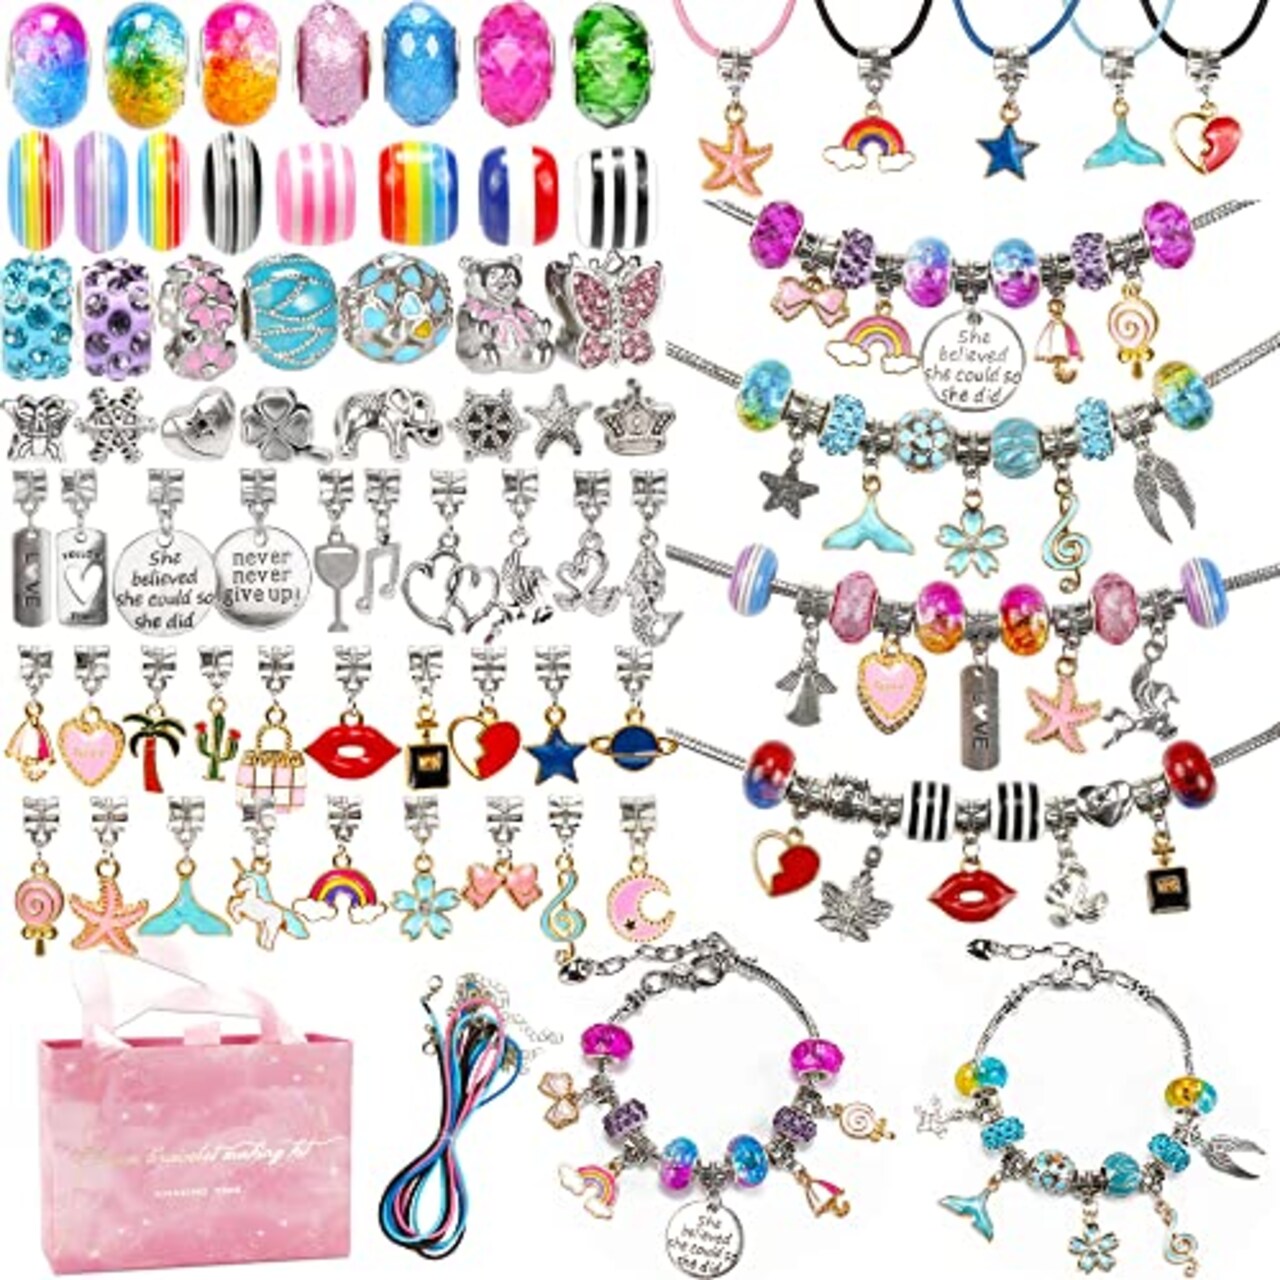 AMAZING TIME 130 Pieces DIY Charm Bracelet Making Kit Including Jewelry  Beads, Snake Chains for Girls Teens Age 8-12 Unicorn Mermaid Gifts  Christmas Stocking Stuffer